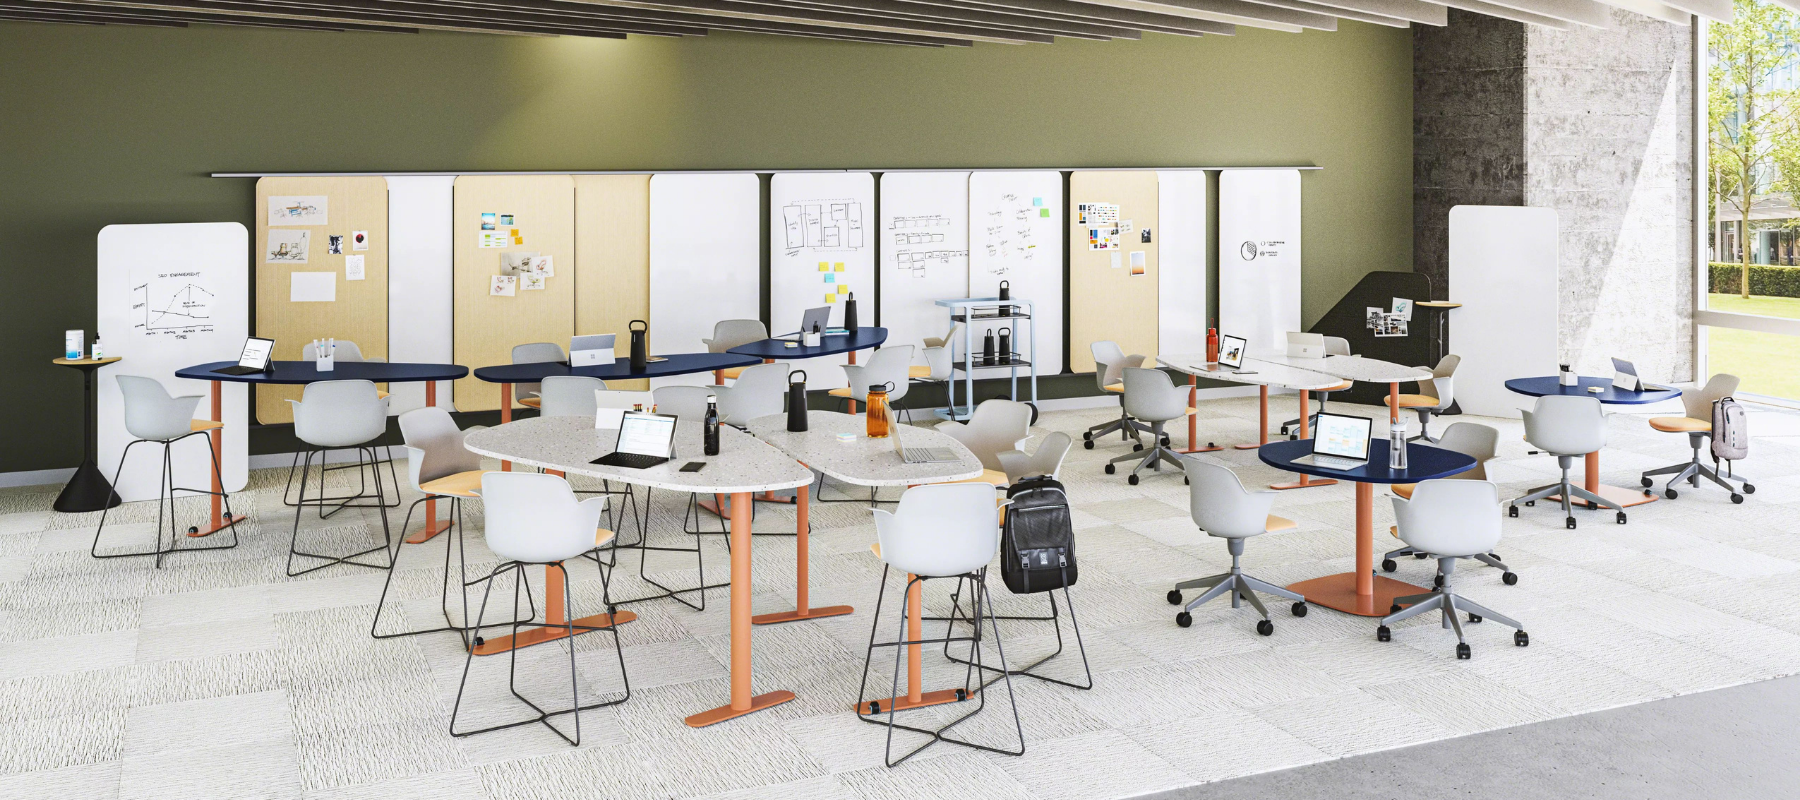 classroom with uniquely shaped tables with painted orange bases